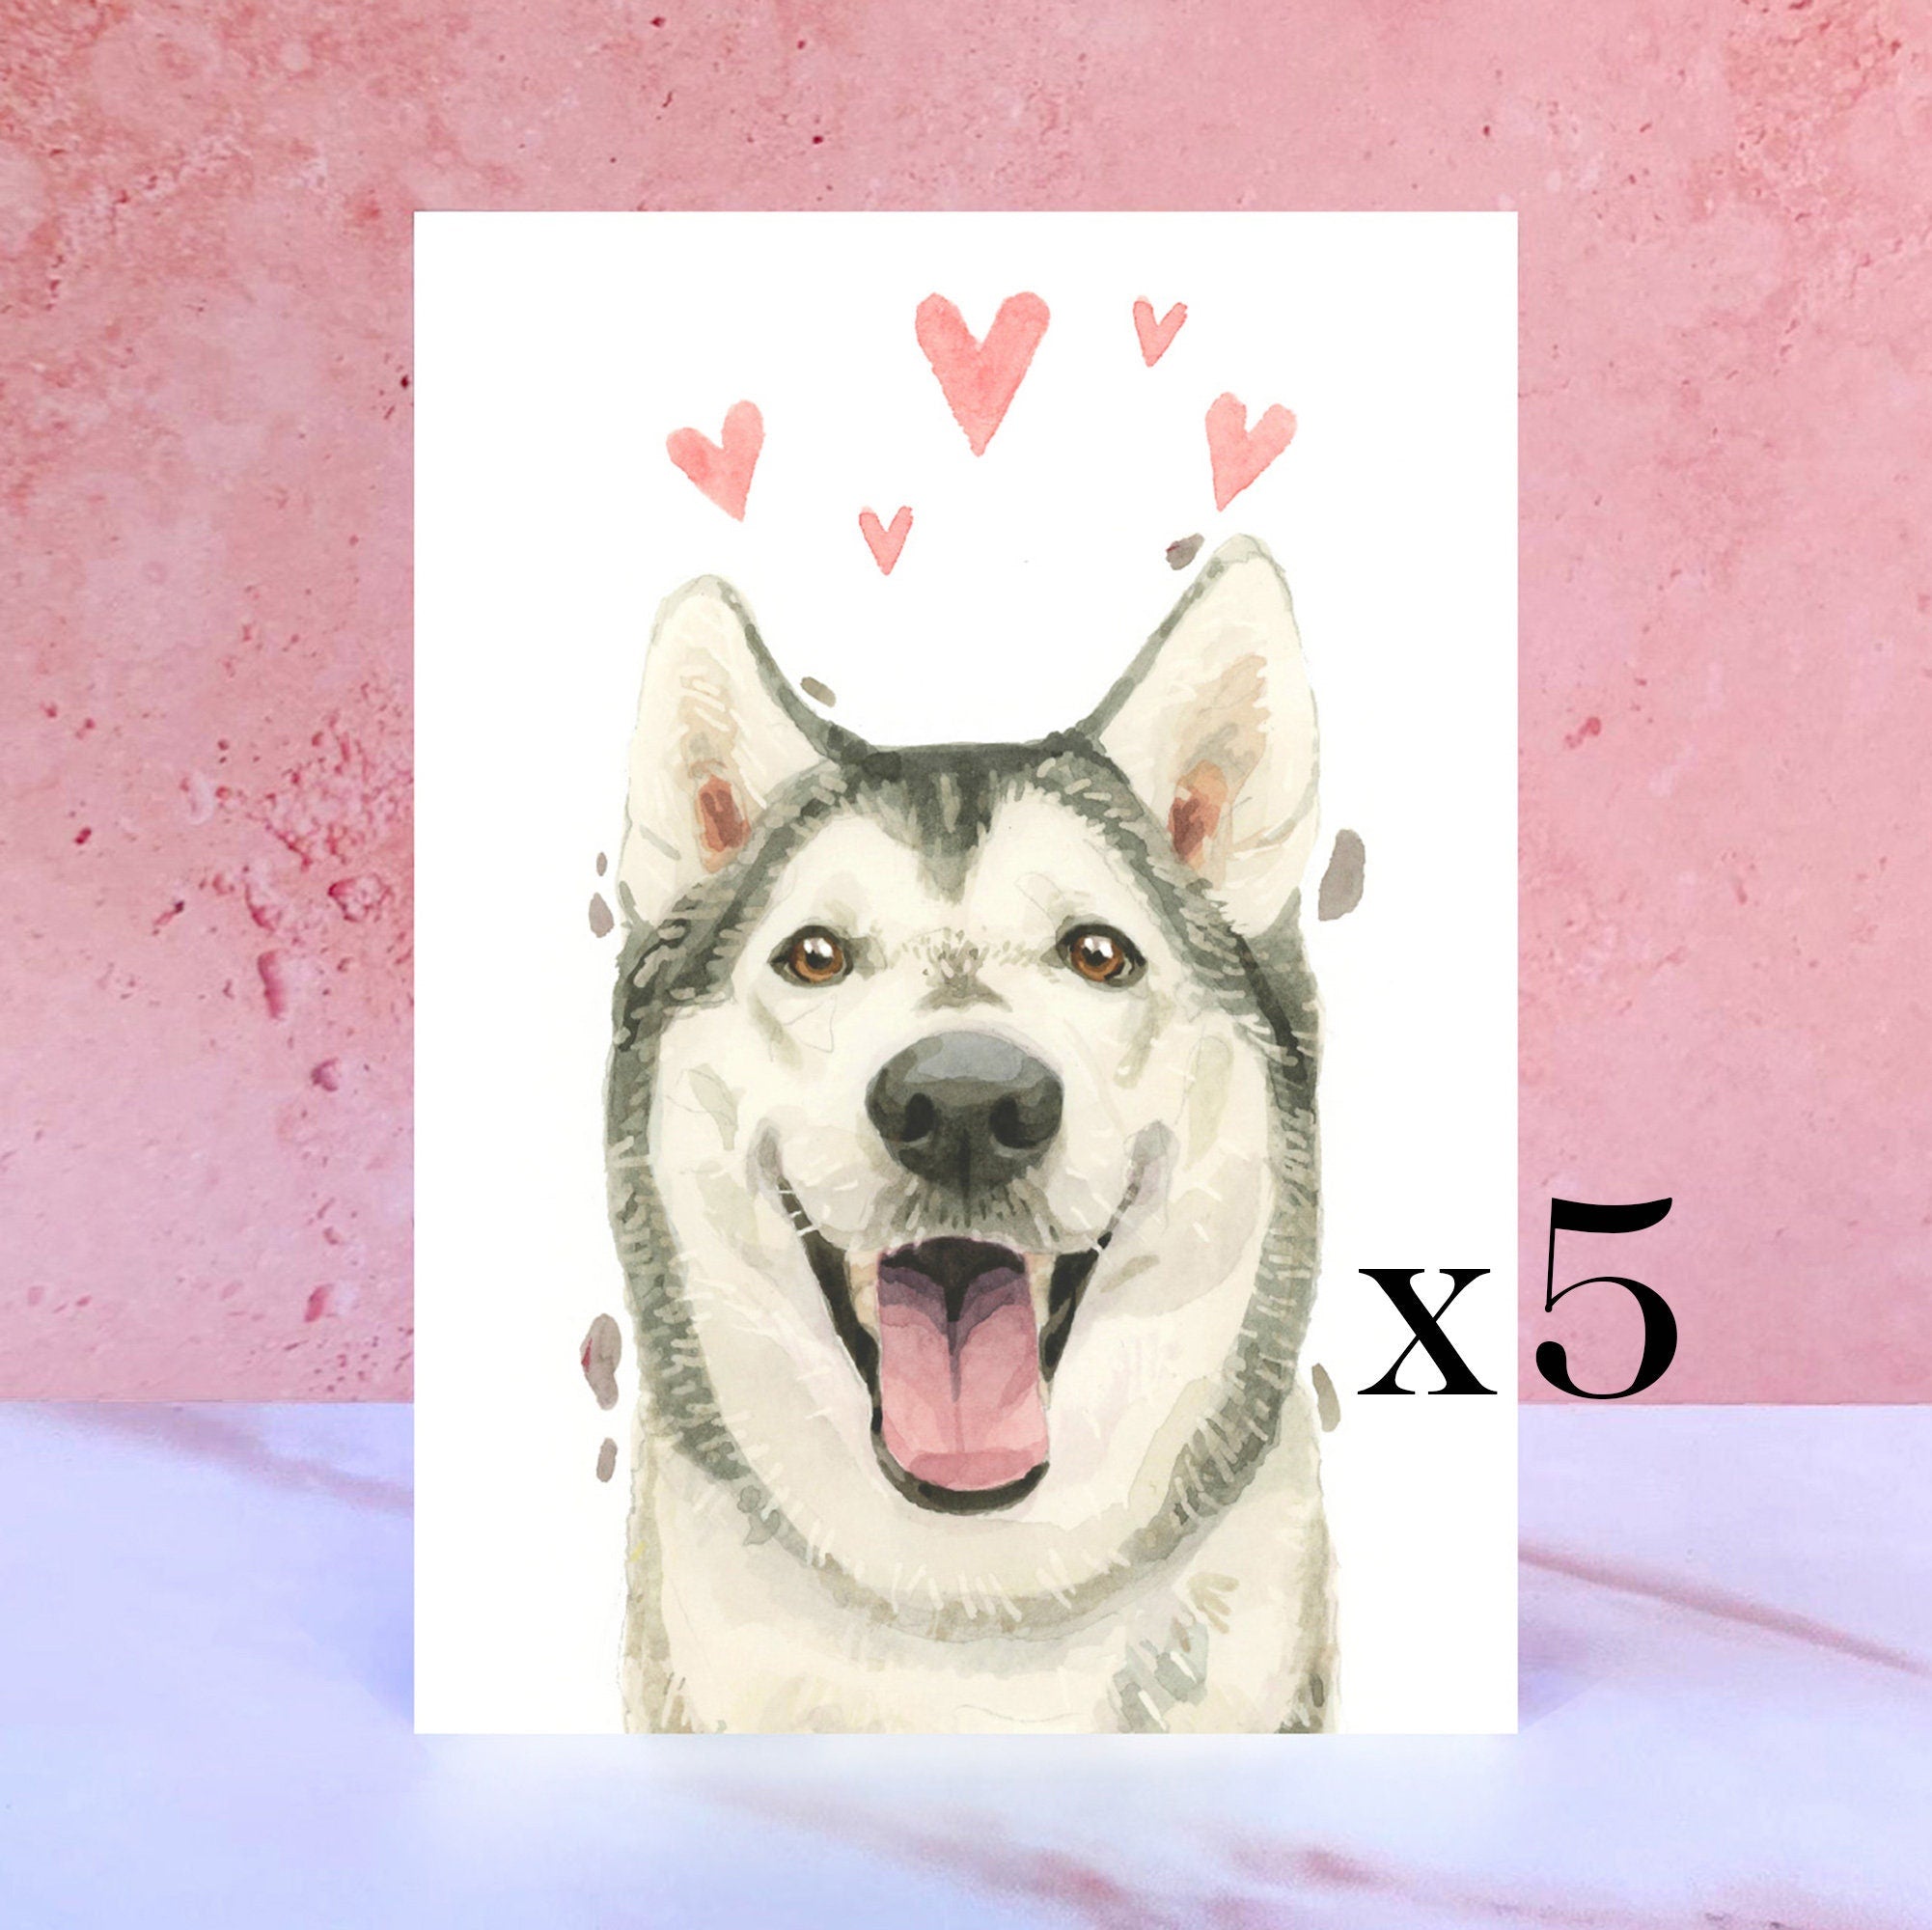 Pack of 5 Siberian Husky Licks & Kisses Card for Valentines, Anniversaries and from the Dog